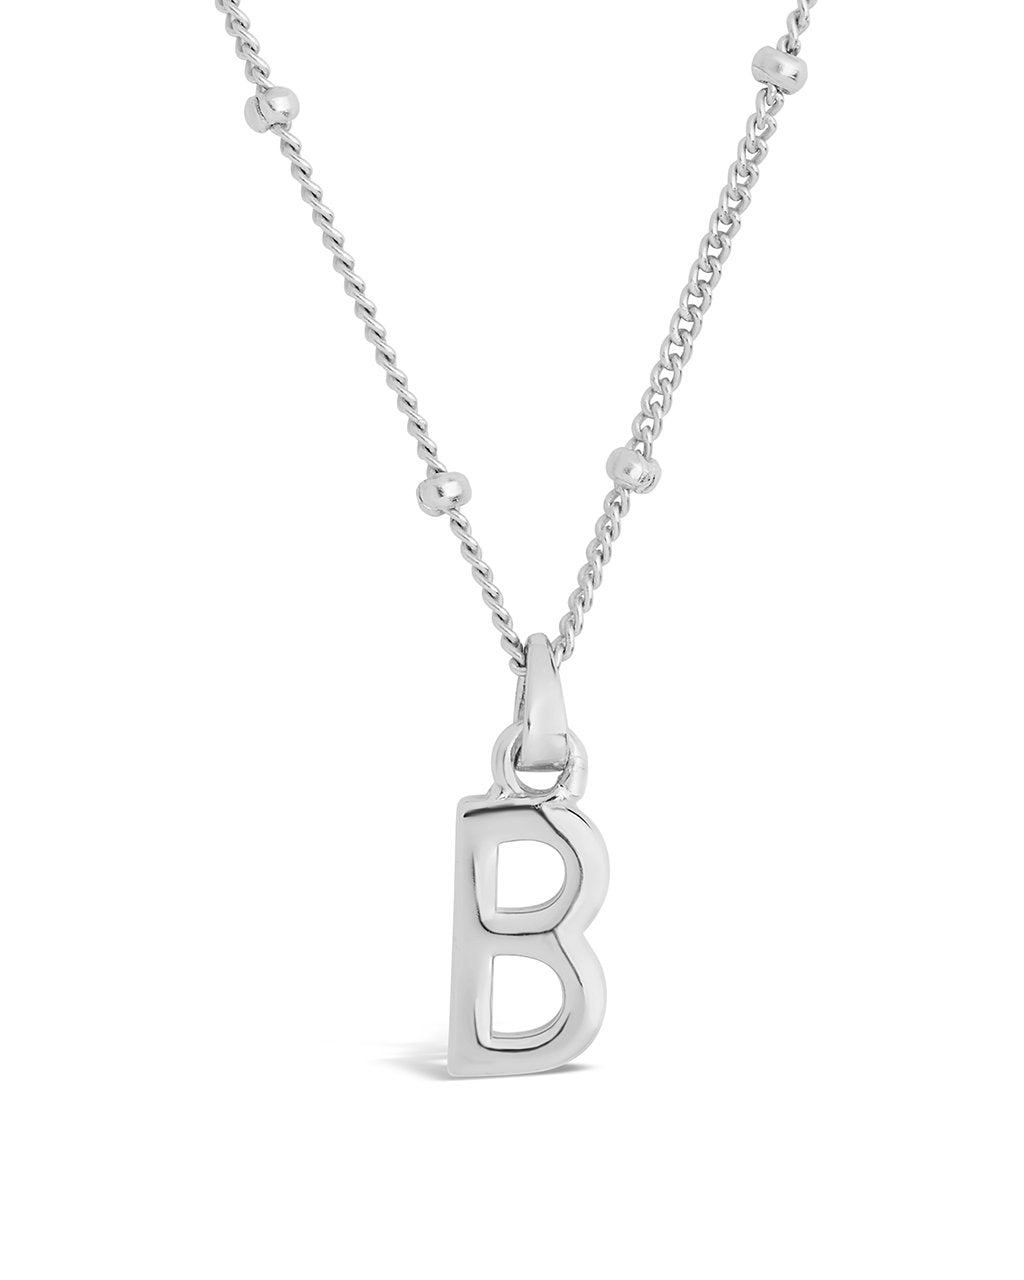 Sterling Silver Initial Necklace with Beaded Chain Necklace Sterling Forever Silver B 